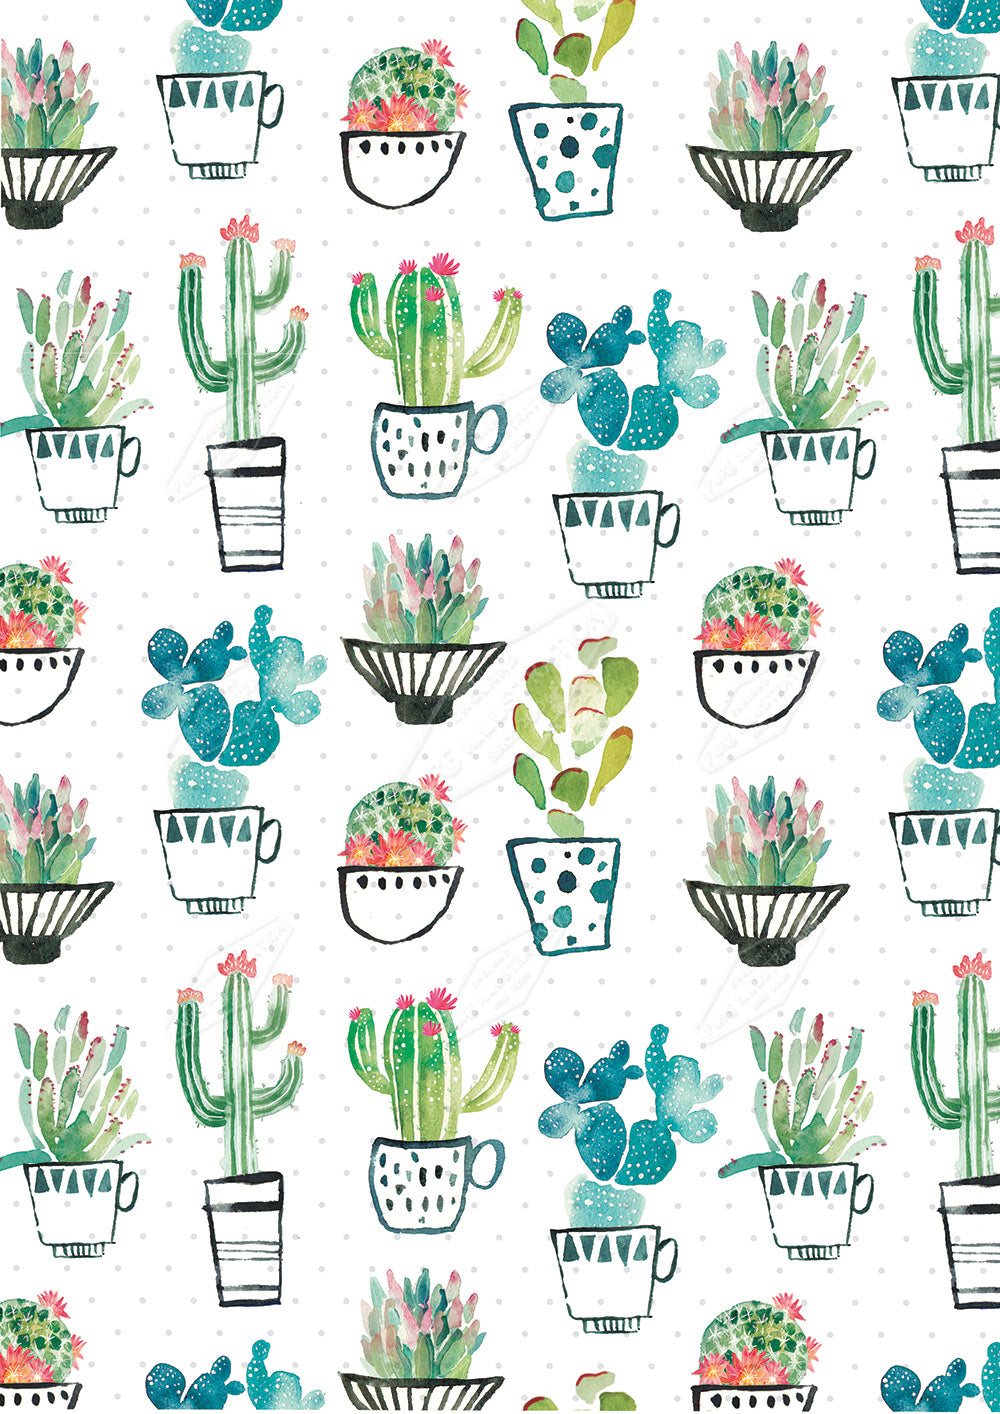 00028701EST- Emily Stalley is represented by Pure Art Licensing Agency - Everyday Pattern Design